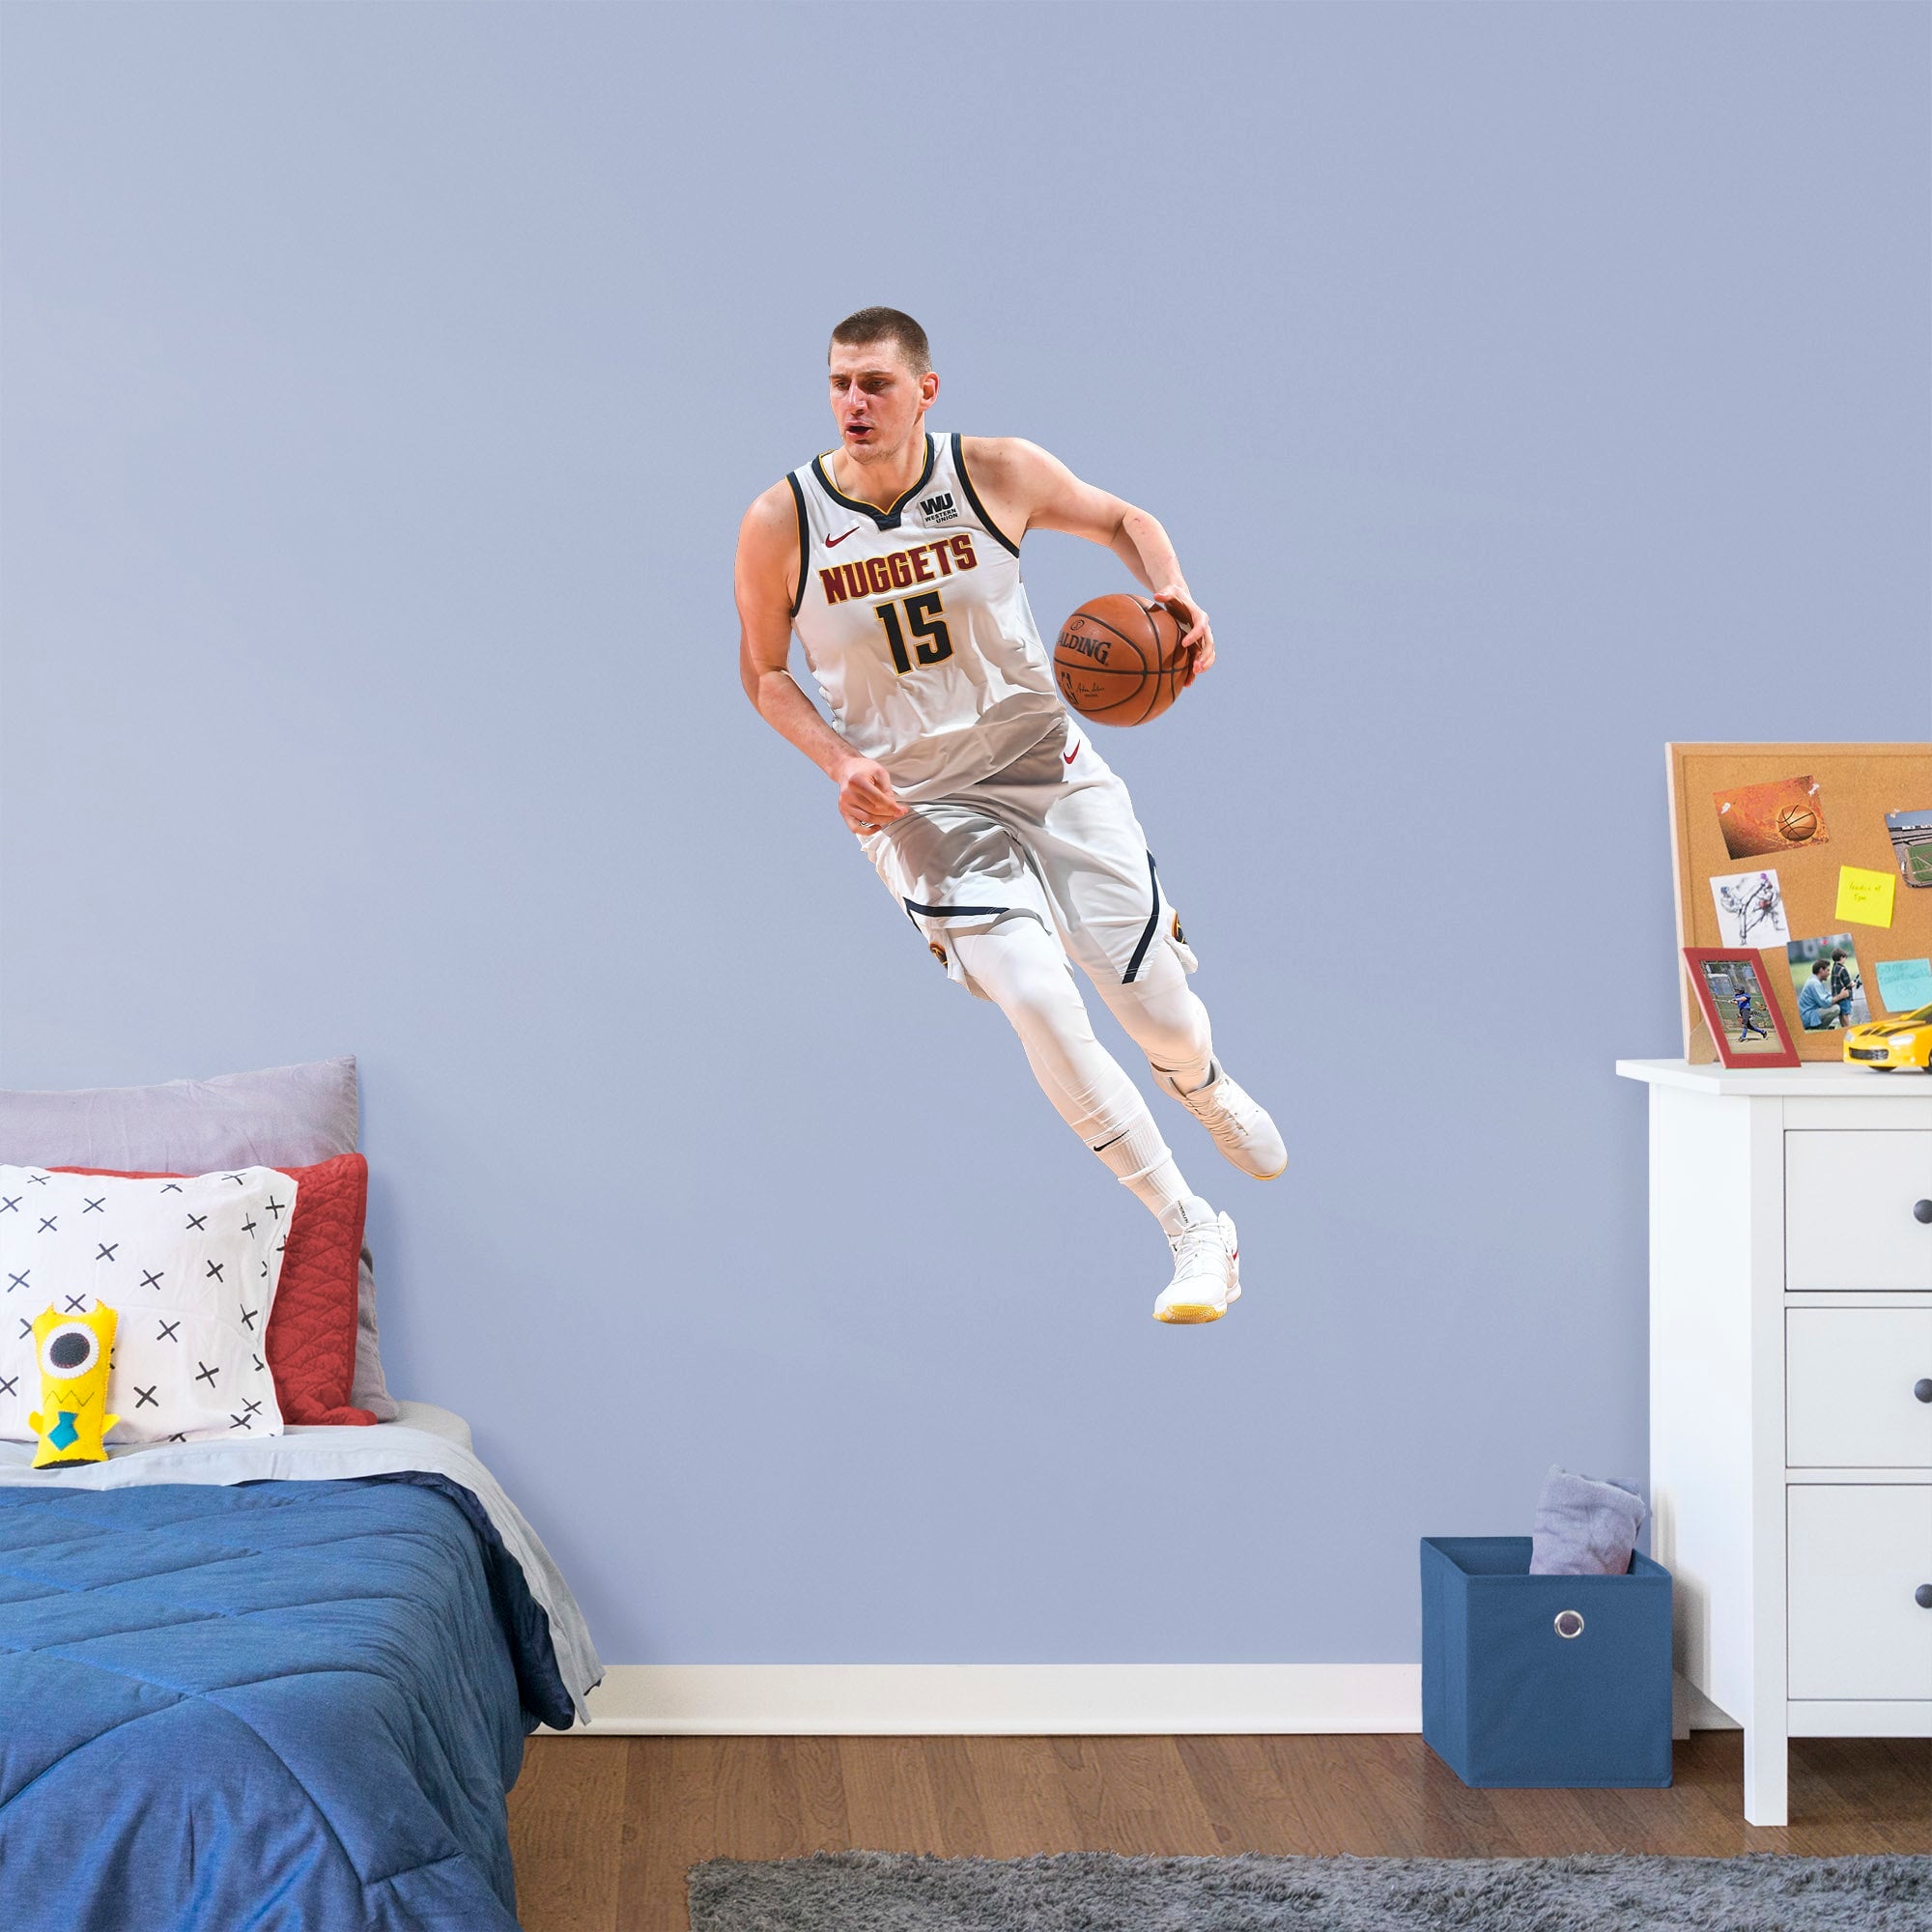 Nikola Jokic for Denver Nuggets - Officially Licensed NBA Removable Wall Decal Giant Athlete + 2 Decals (28"W x 51"H) by Fathead